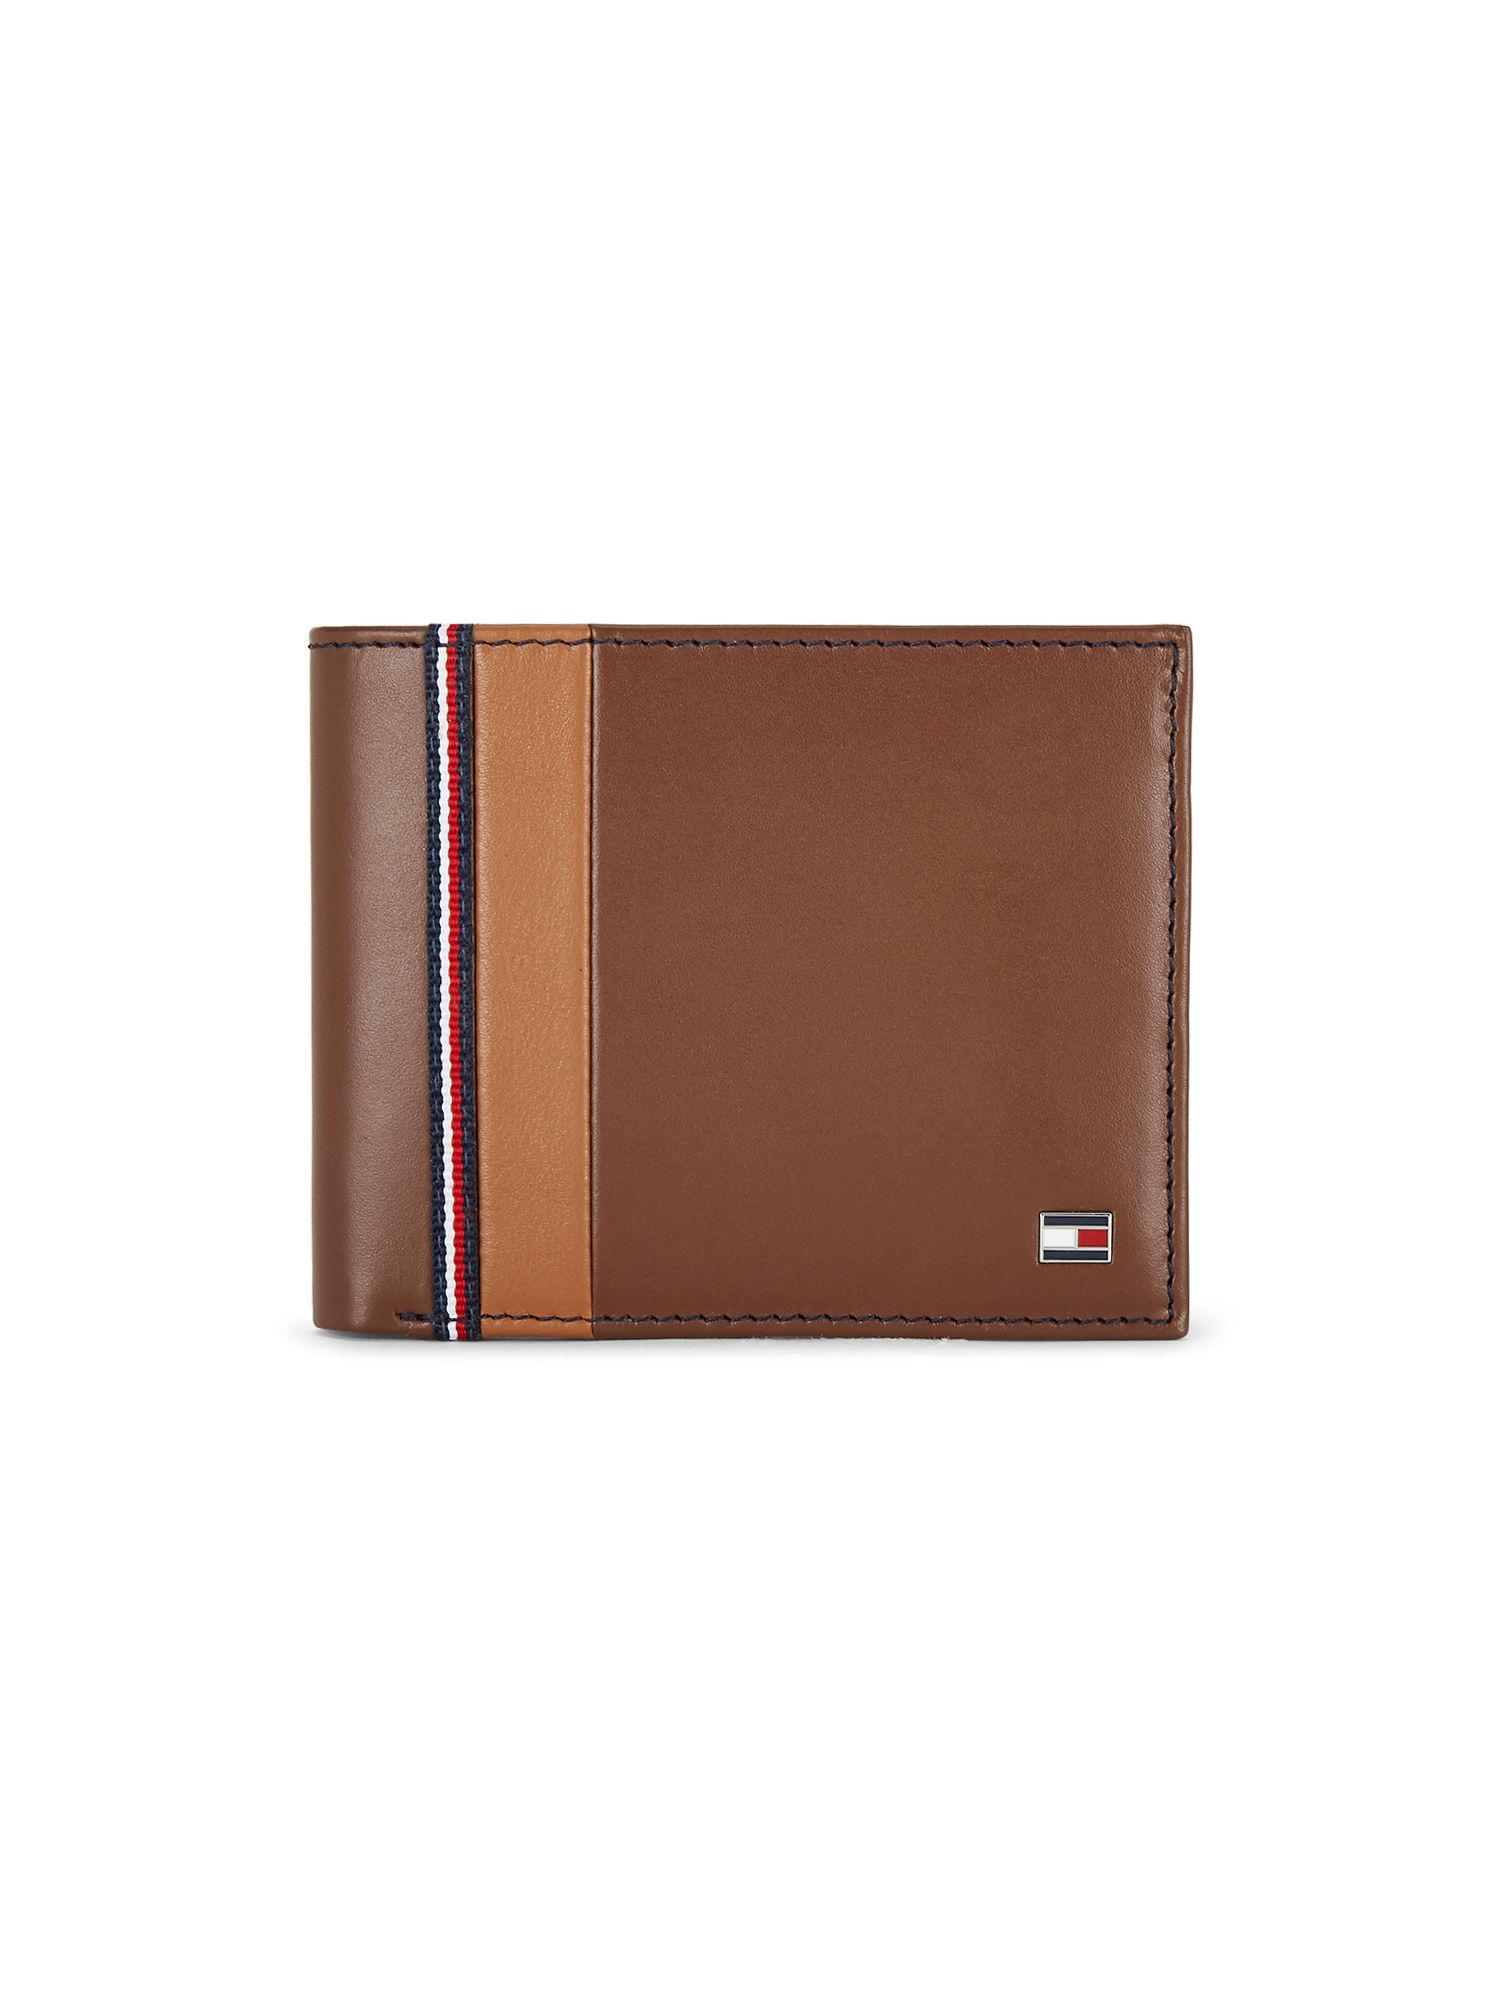 north mens leather global coin wallet tan